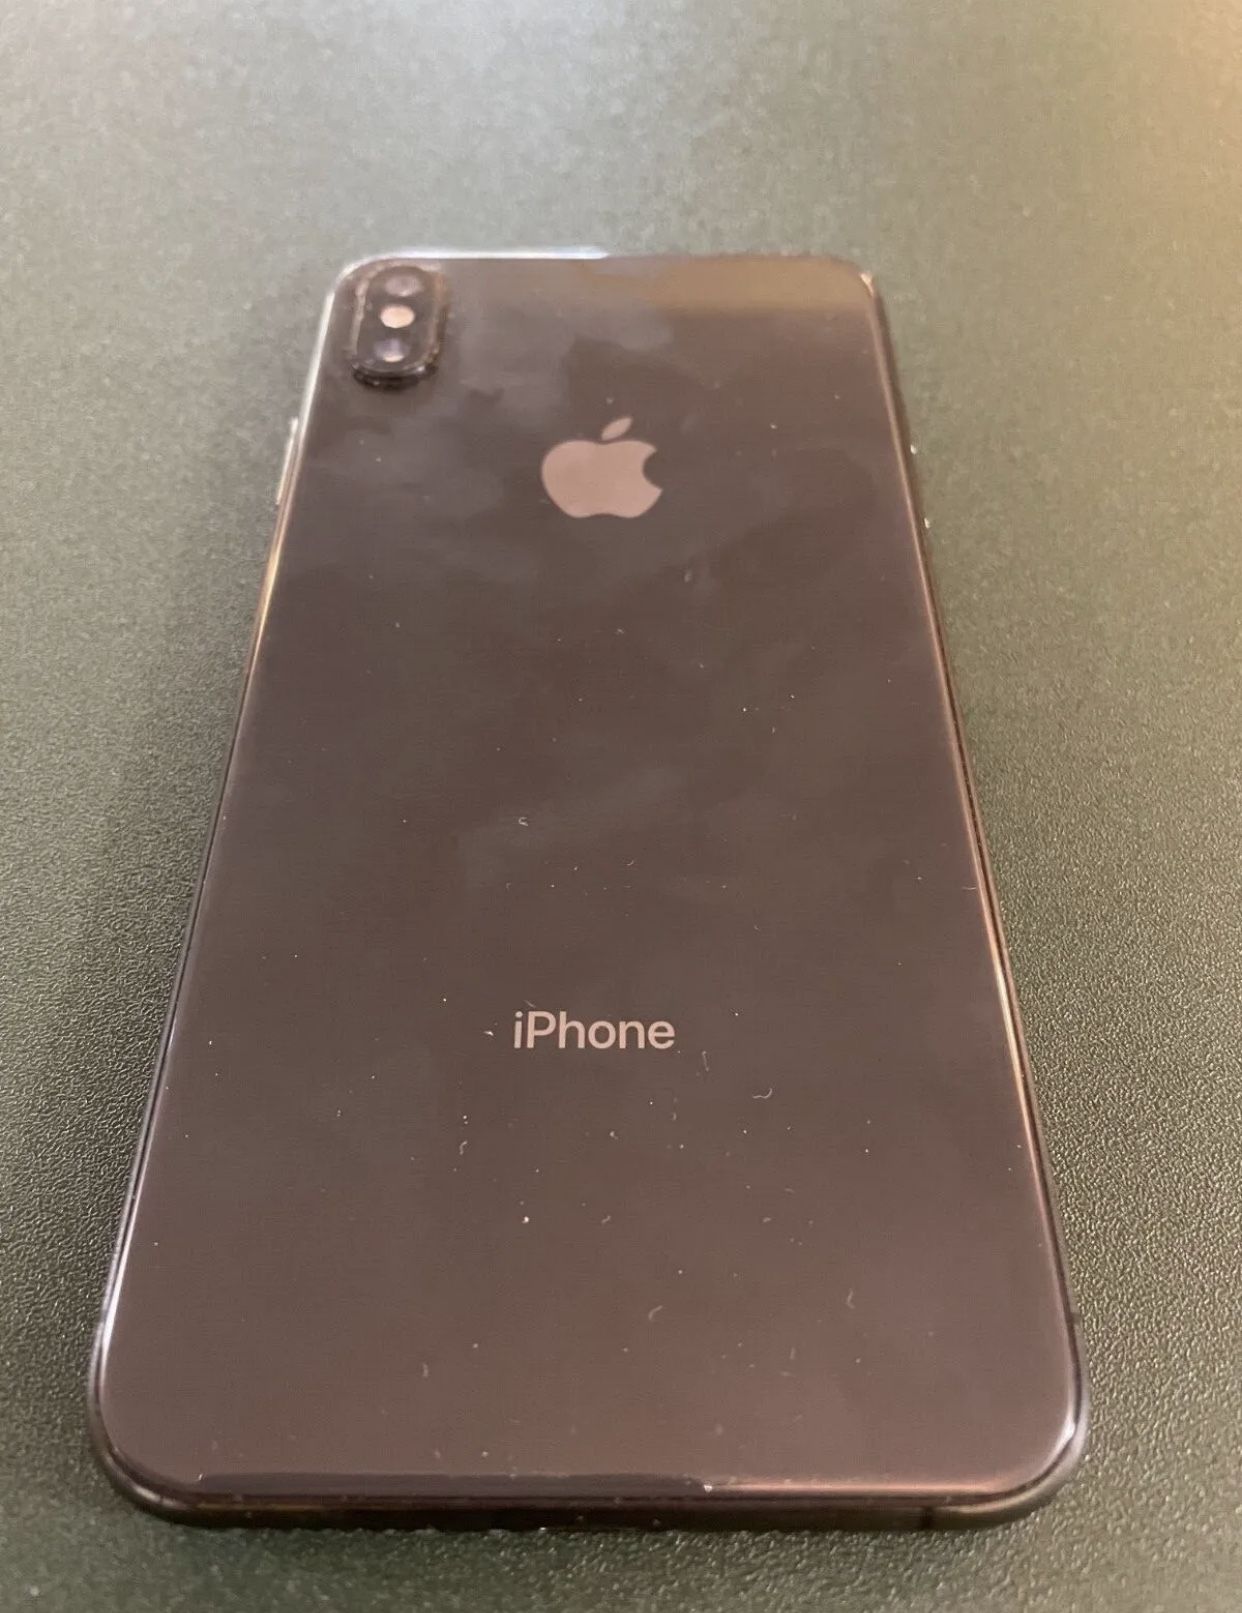 IPhone Xs Max Unlocked Pick Up Only Waterford NJ 08089 PRICE FIRM 